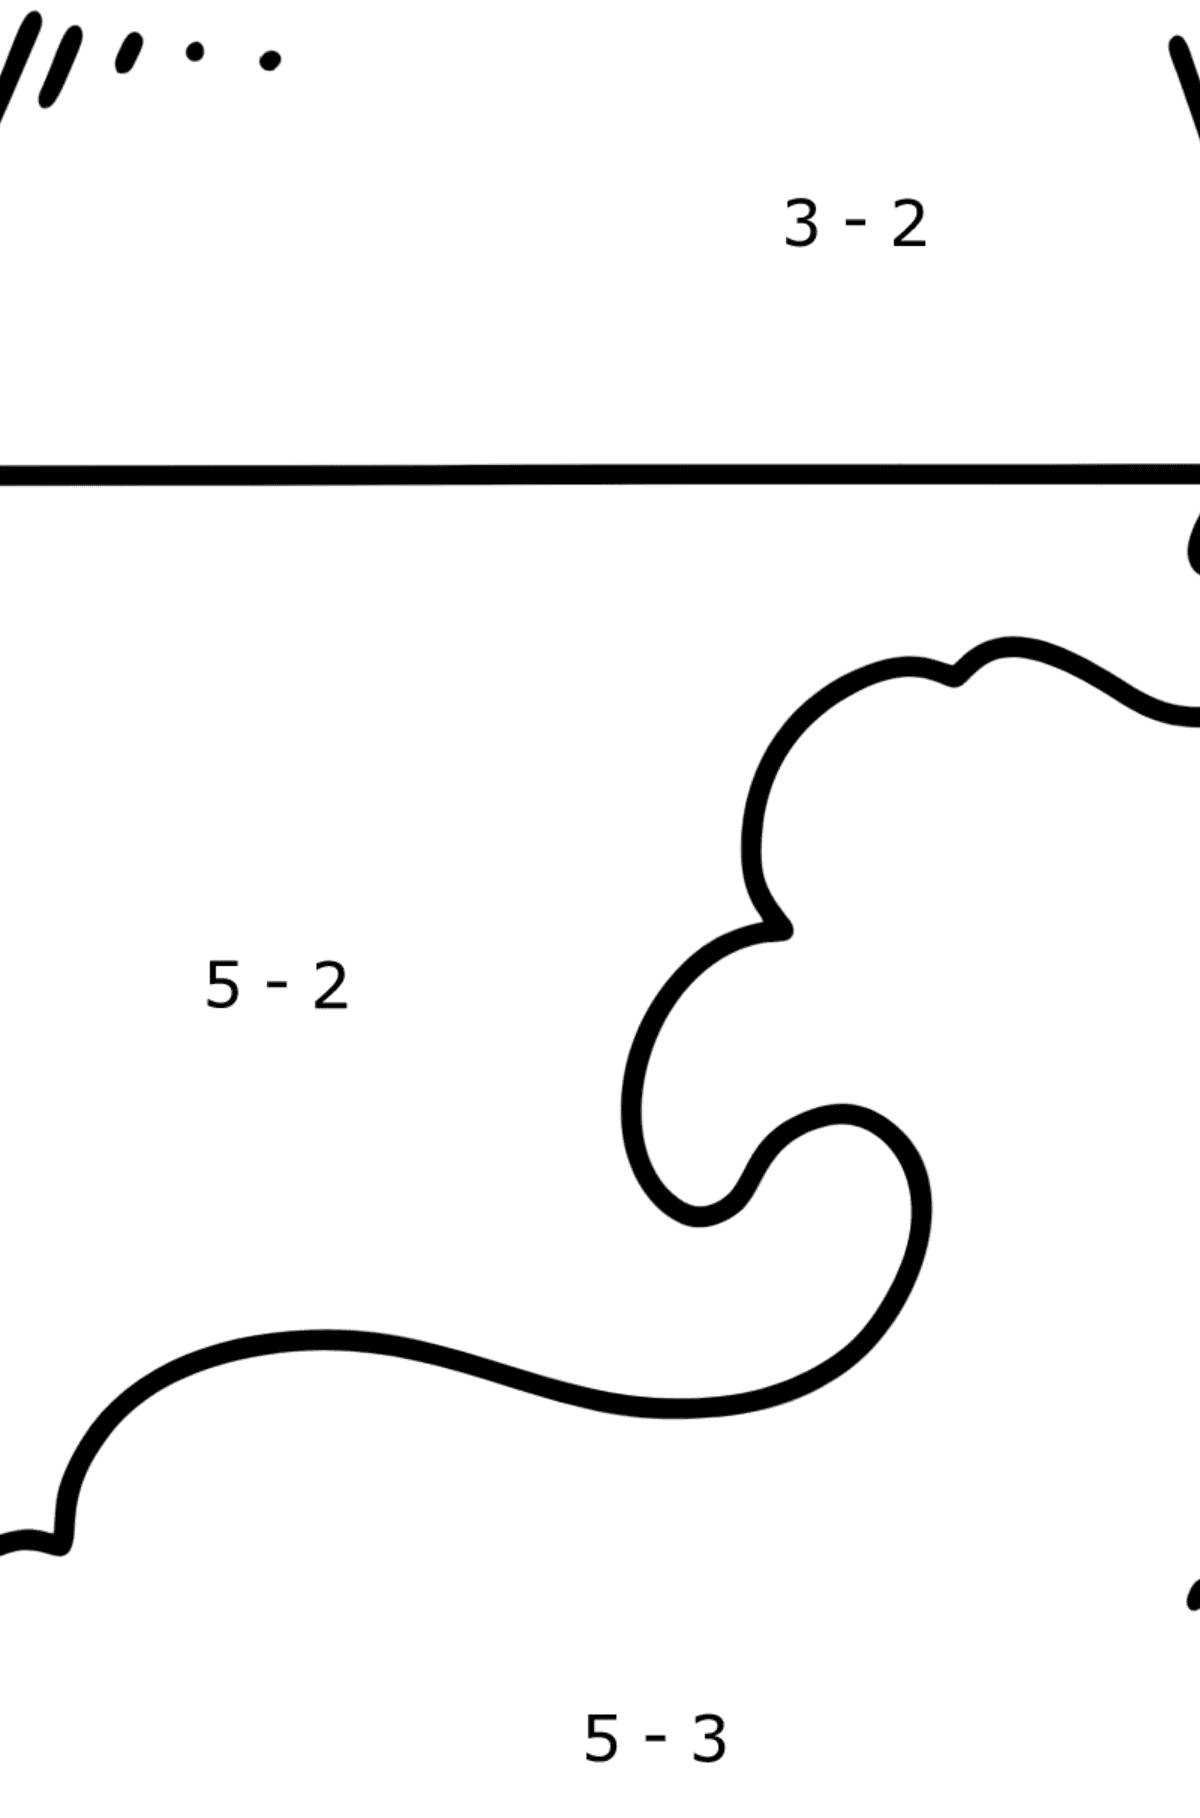 Coloring page - carton of milk - Math Coloring - Subtraction for Kids